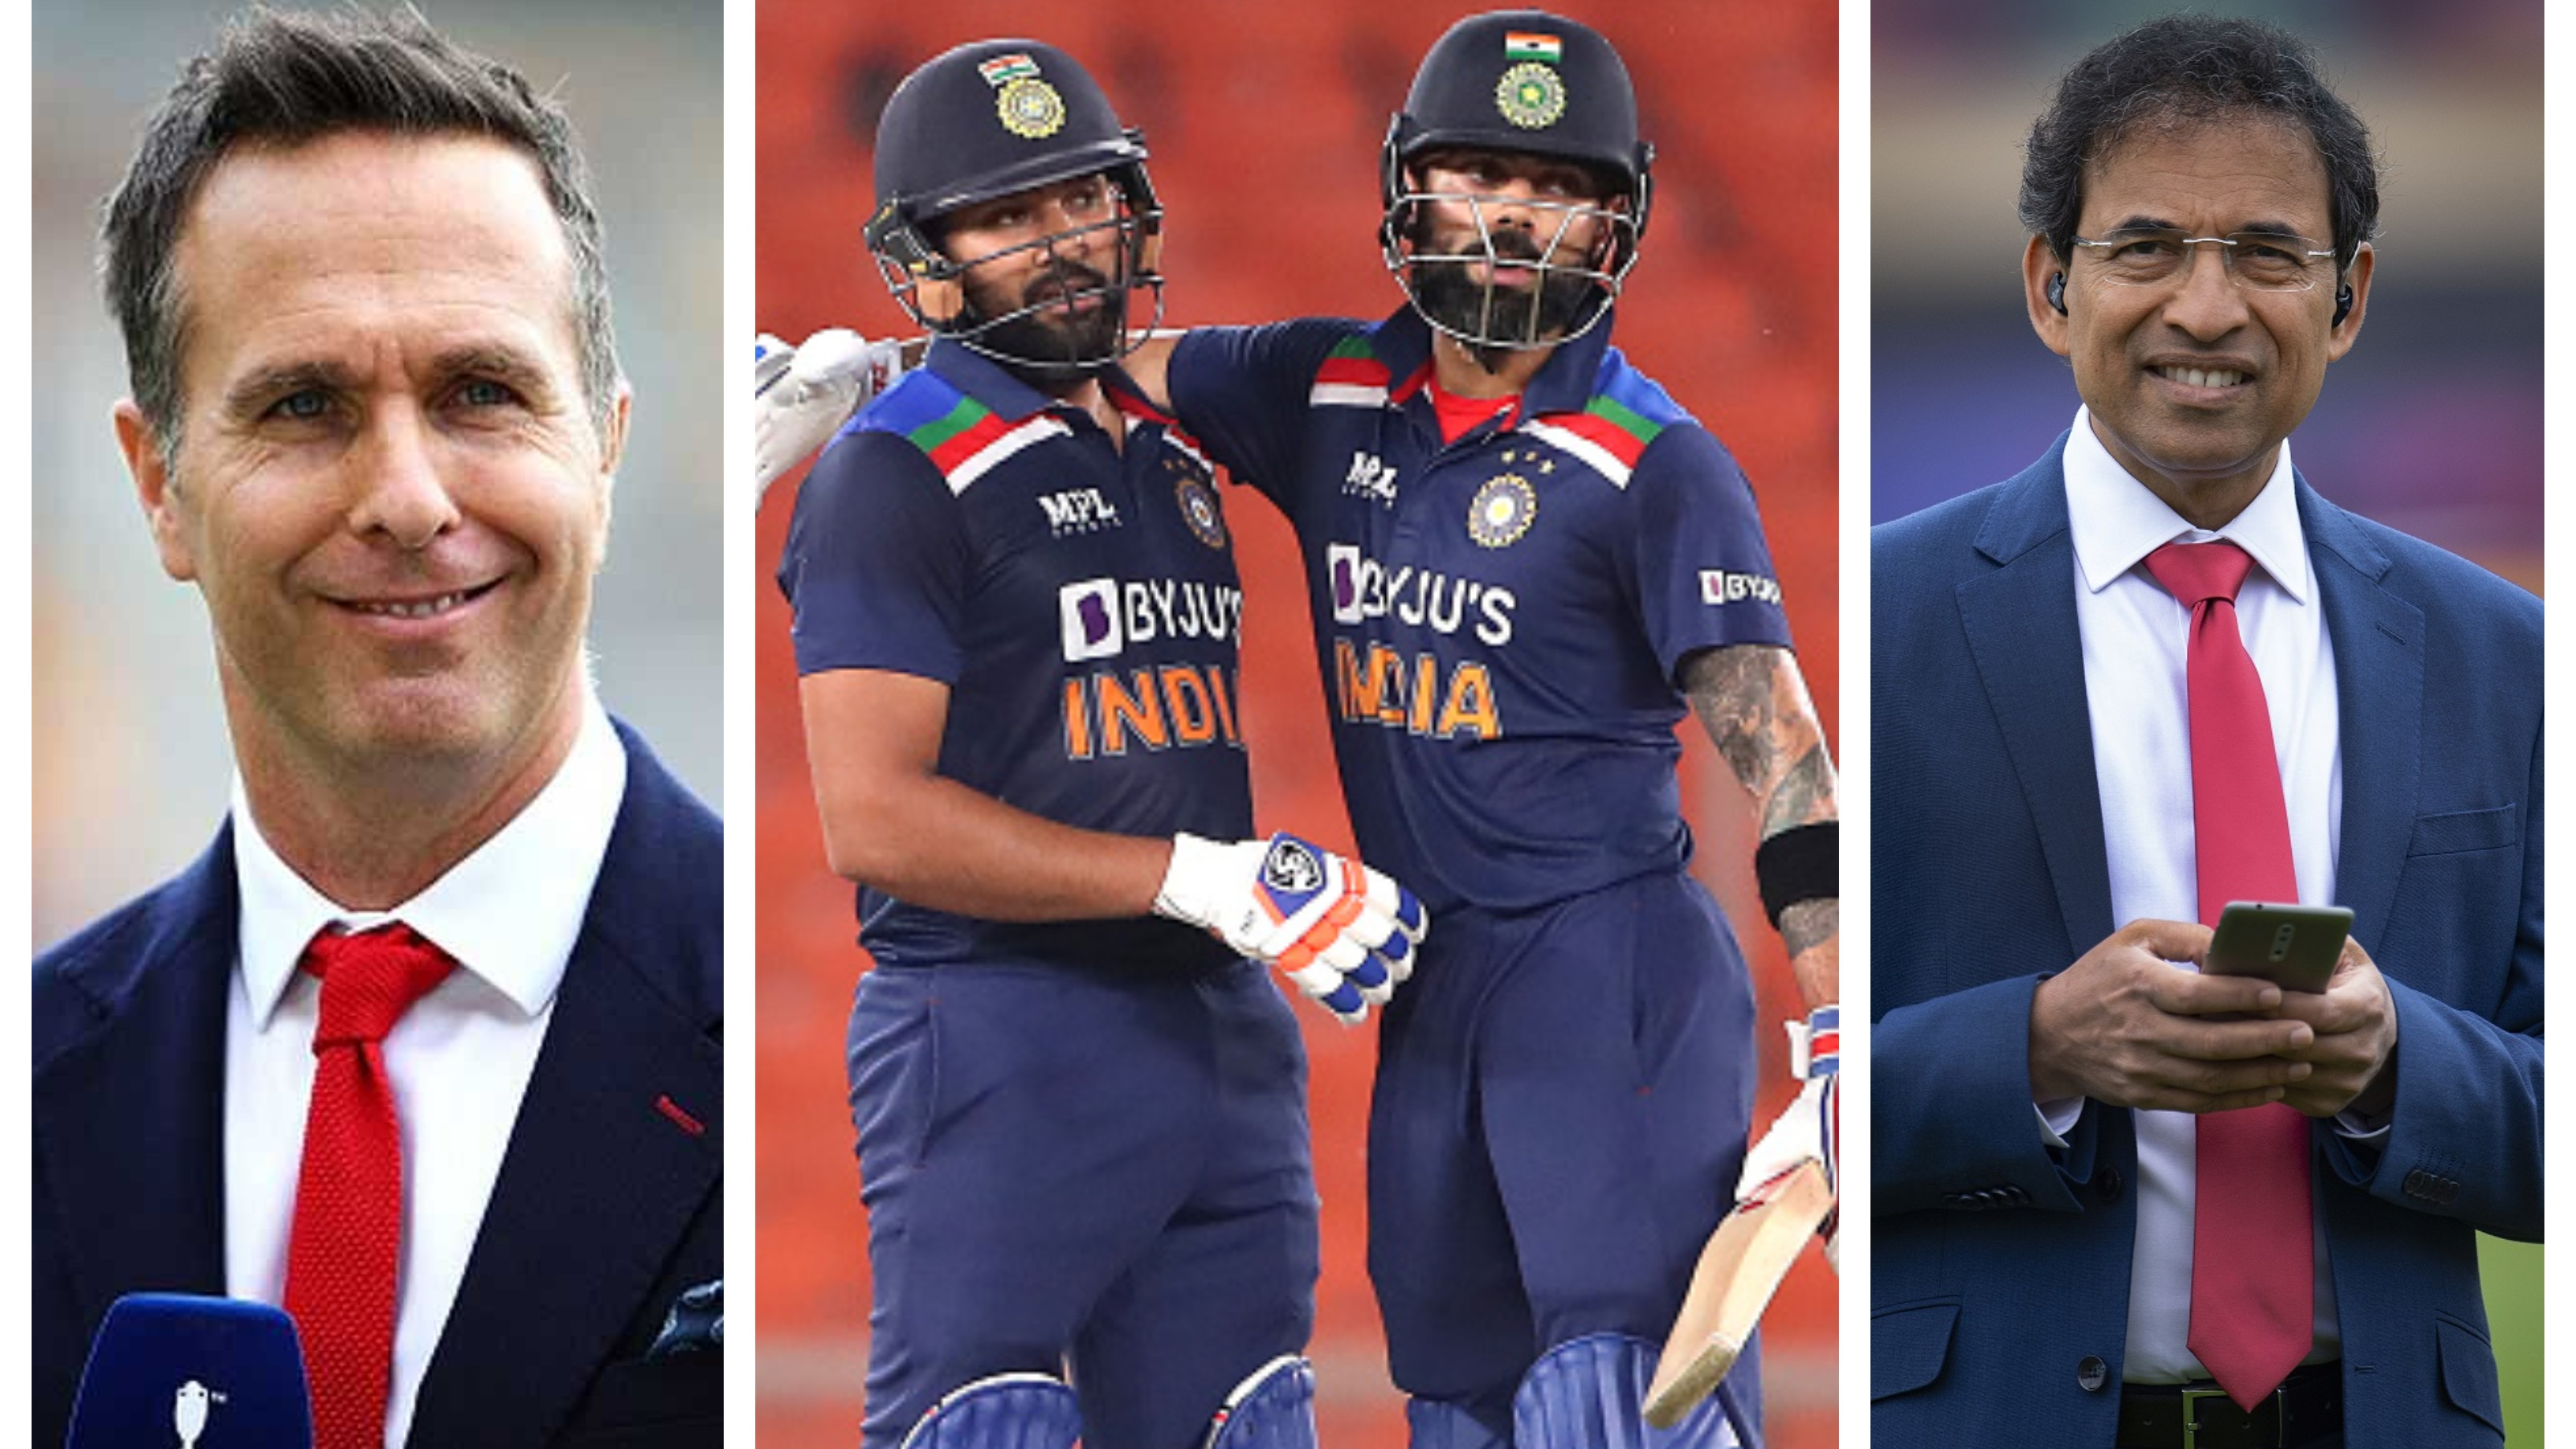 Cricket fraternity reacts after Rohit Sharma replaces Virat Kohli as India's ODI captain